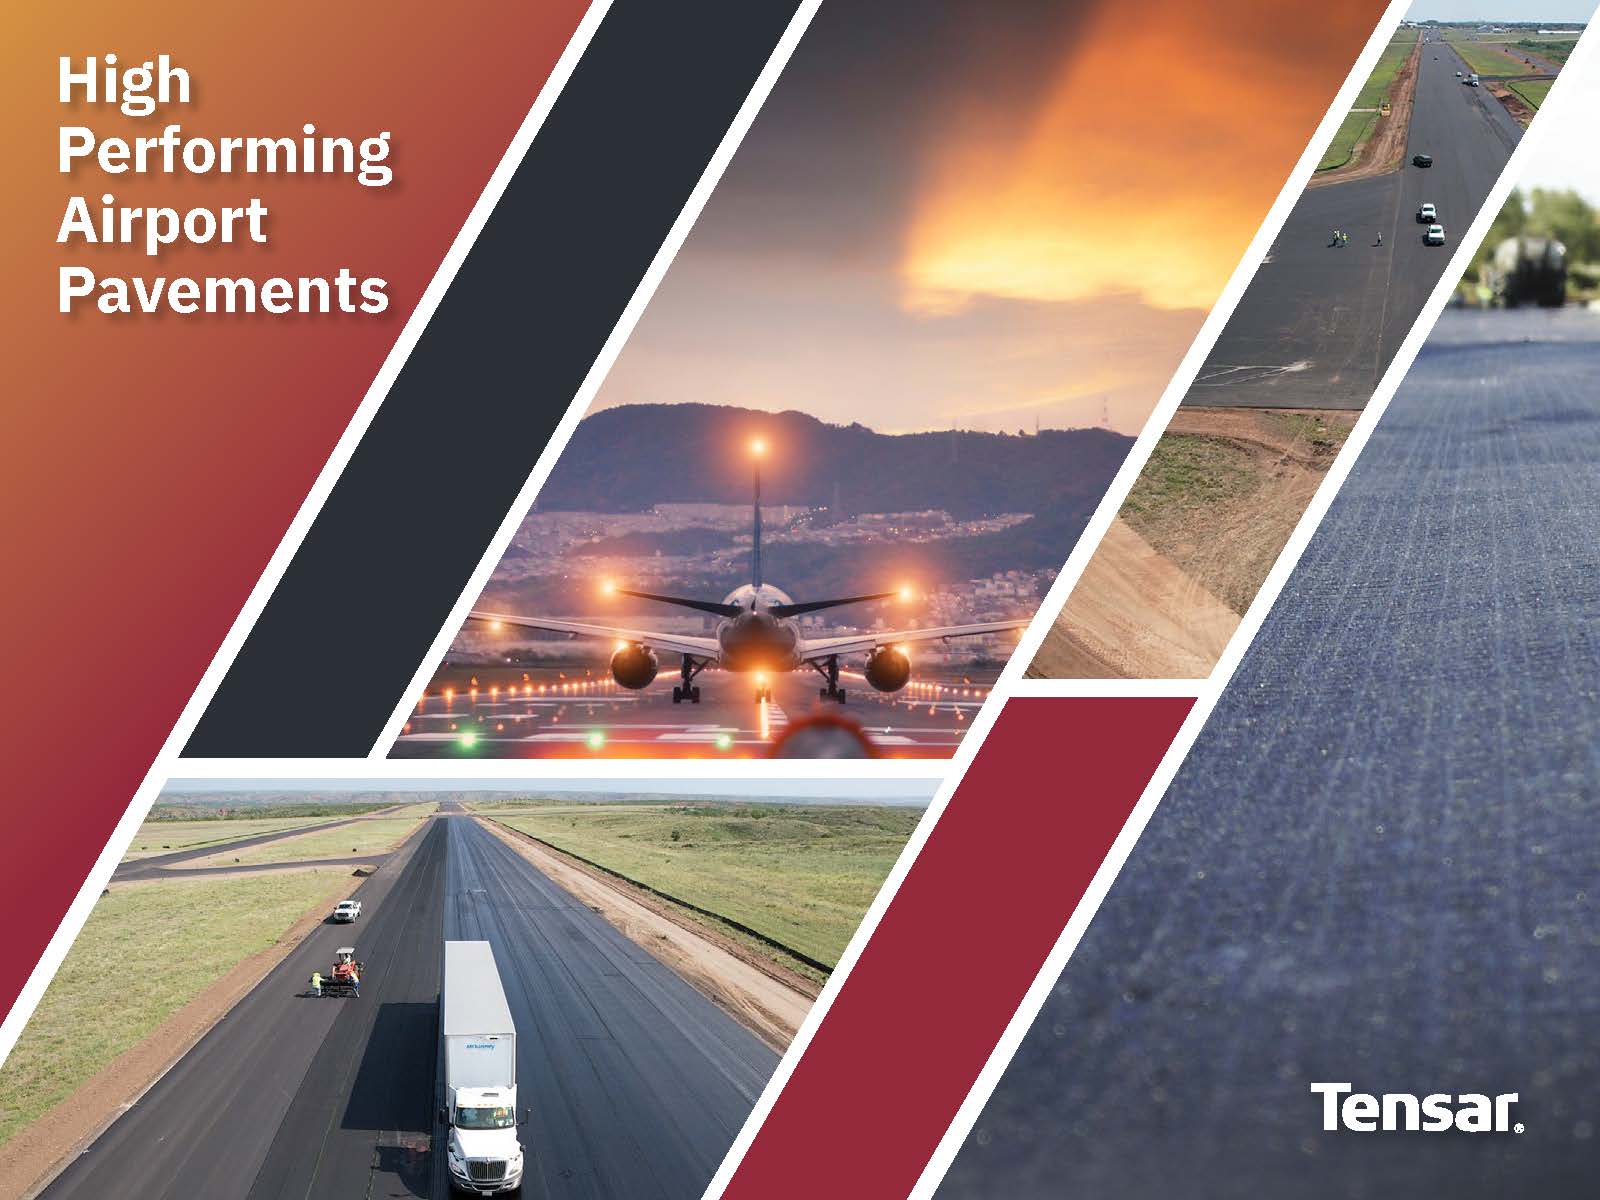 High Performing Airport Pavements Reduce Maintenance